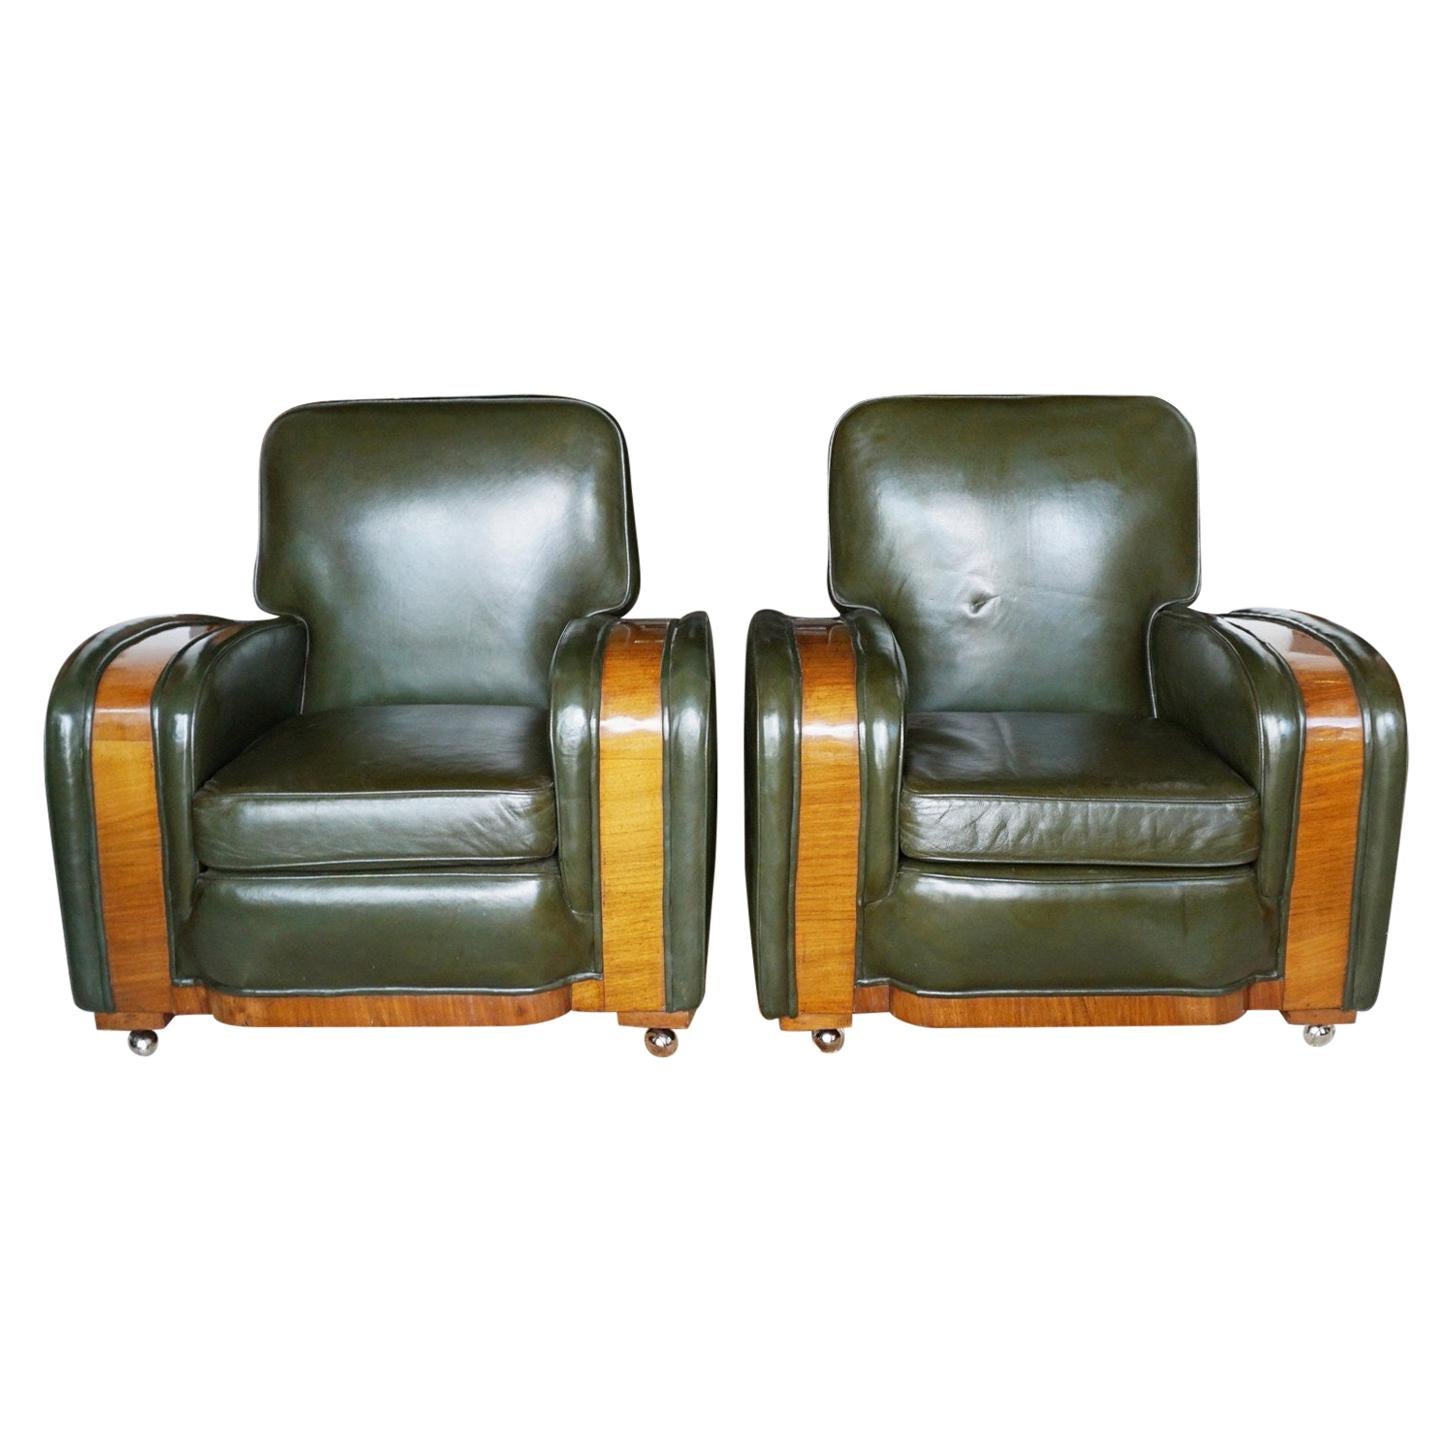 Pair of Art Deco Tank Chairs Attributed to Heal's of London